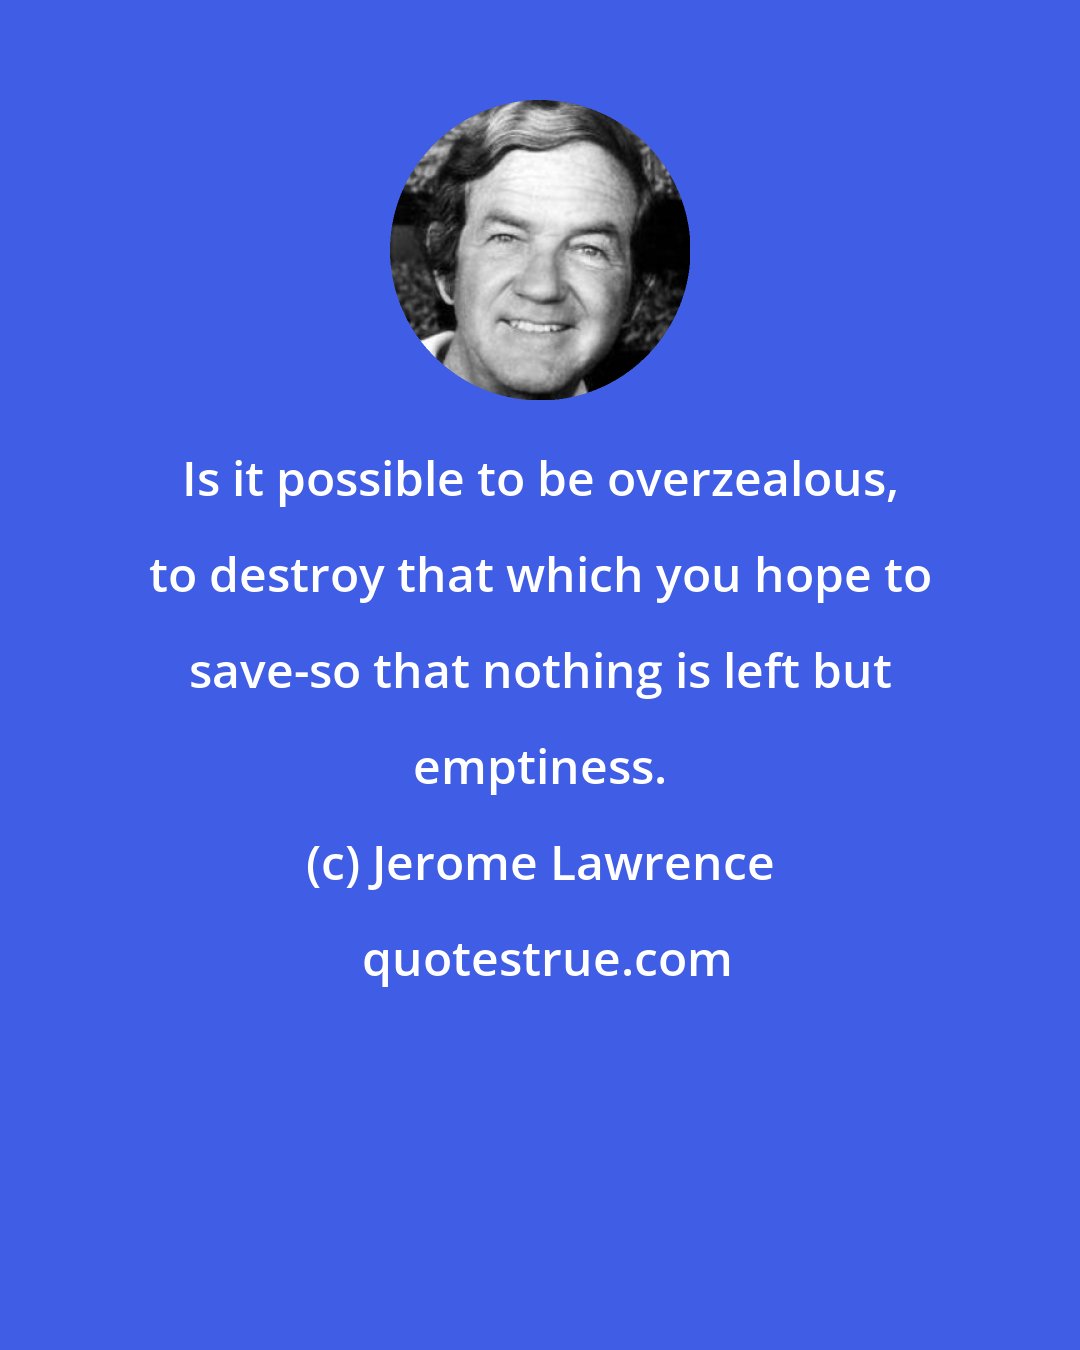 Jerome Lawrence: Is it possible to be overzealous, to destroy that which you hope to save-so that nothing is left but emptiness.